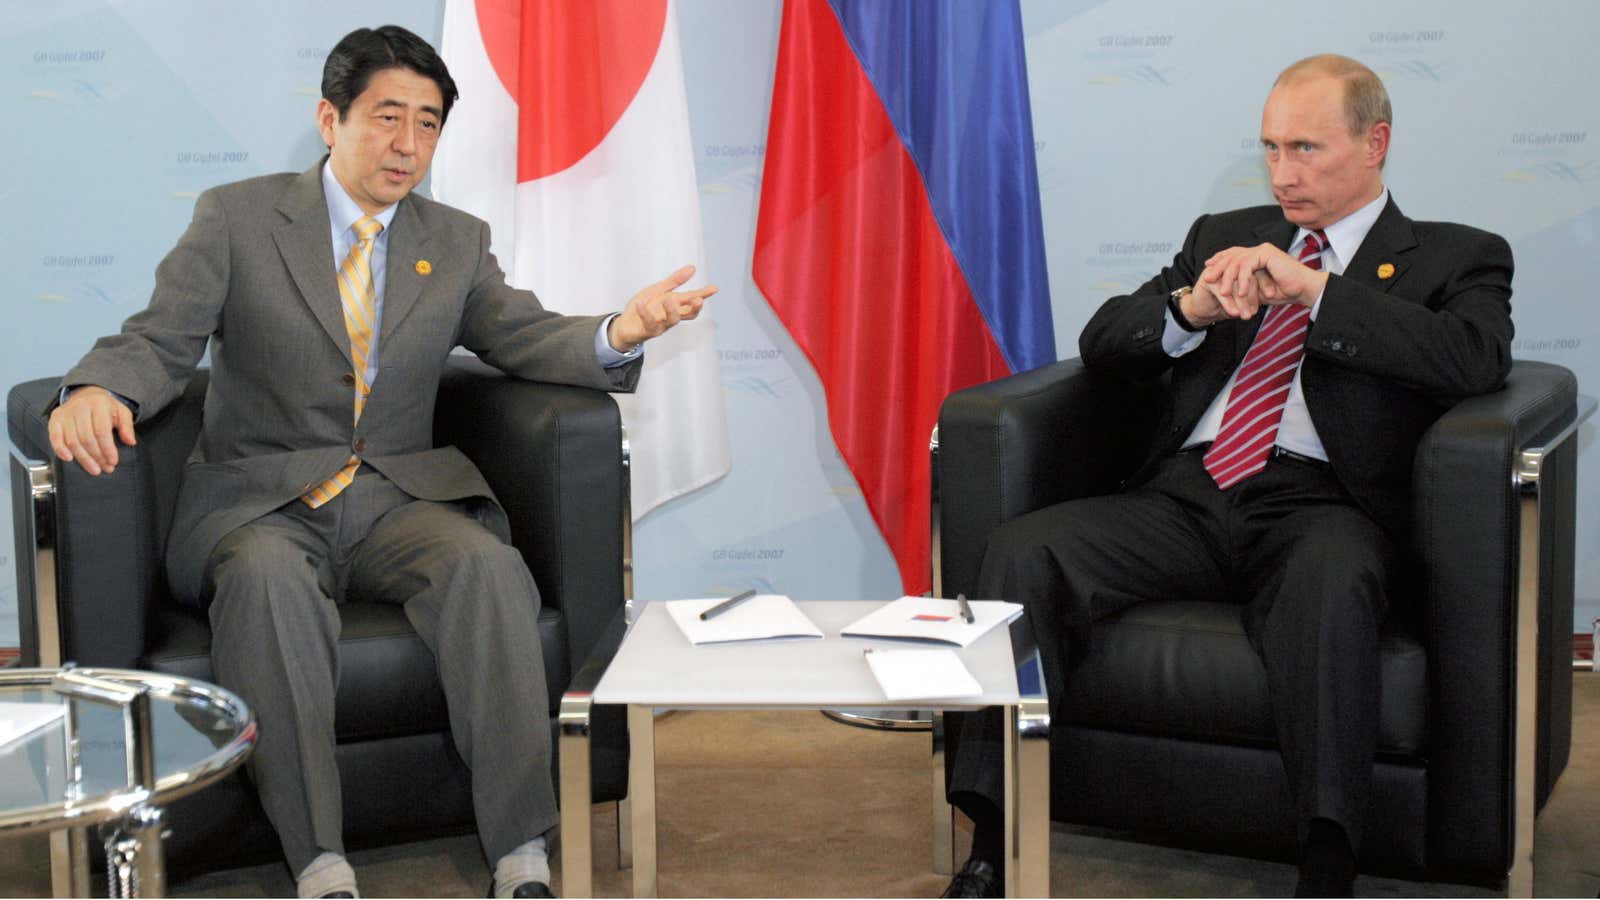 Putin and Abe play ‘Let’s Make a Deal’ on natural gas